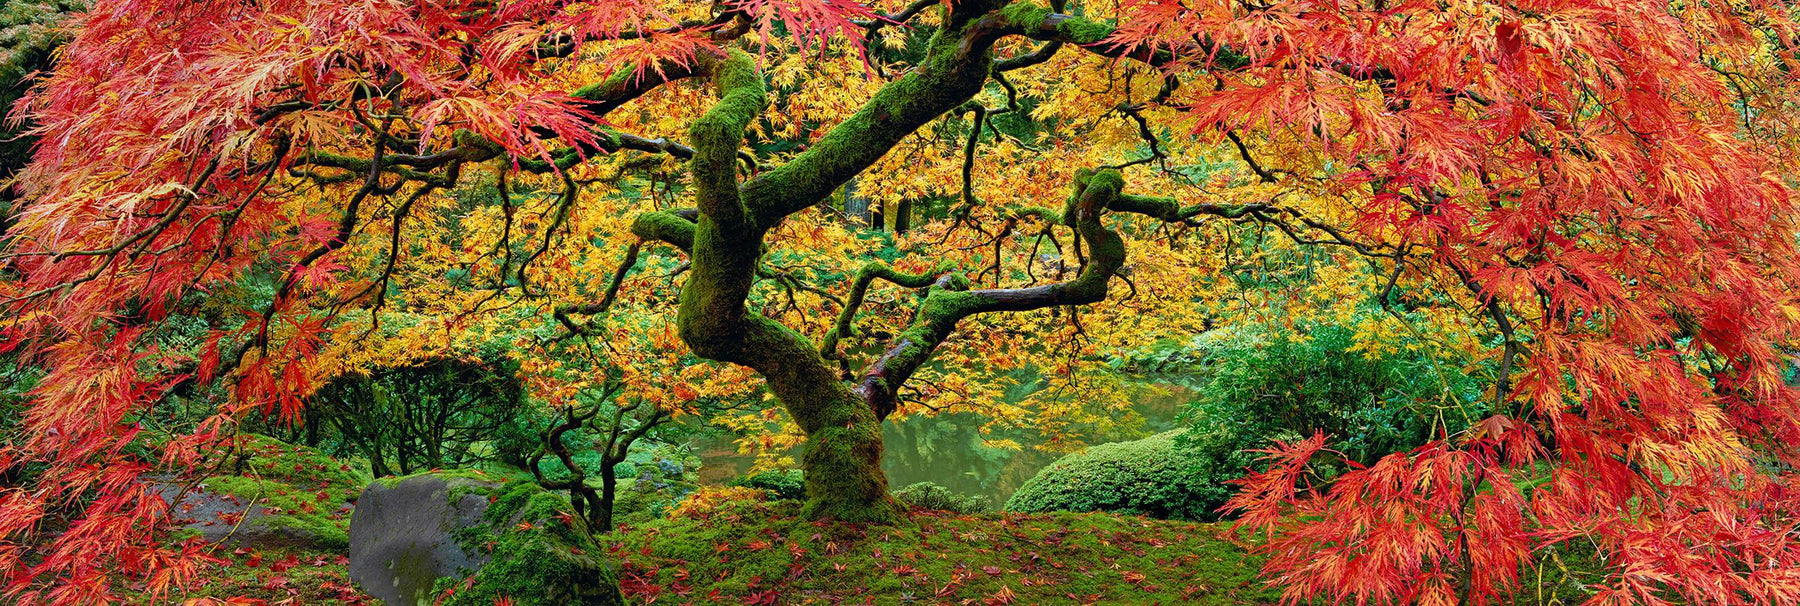 Japanese Maple tree on a mossy hill with its branches of red and yellow leaves stretched out